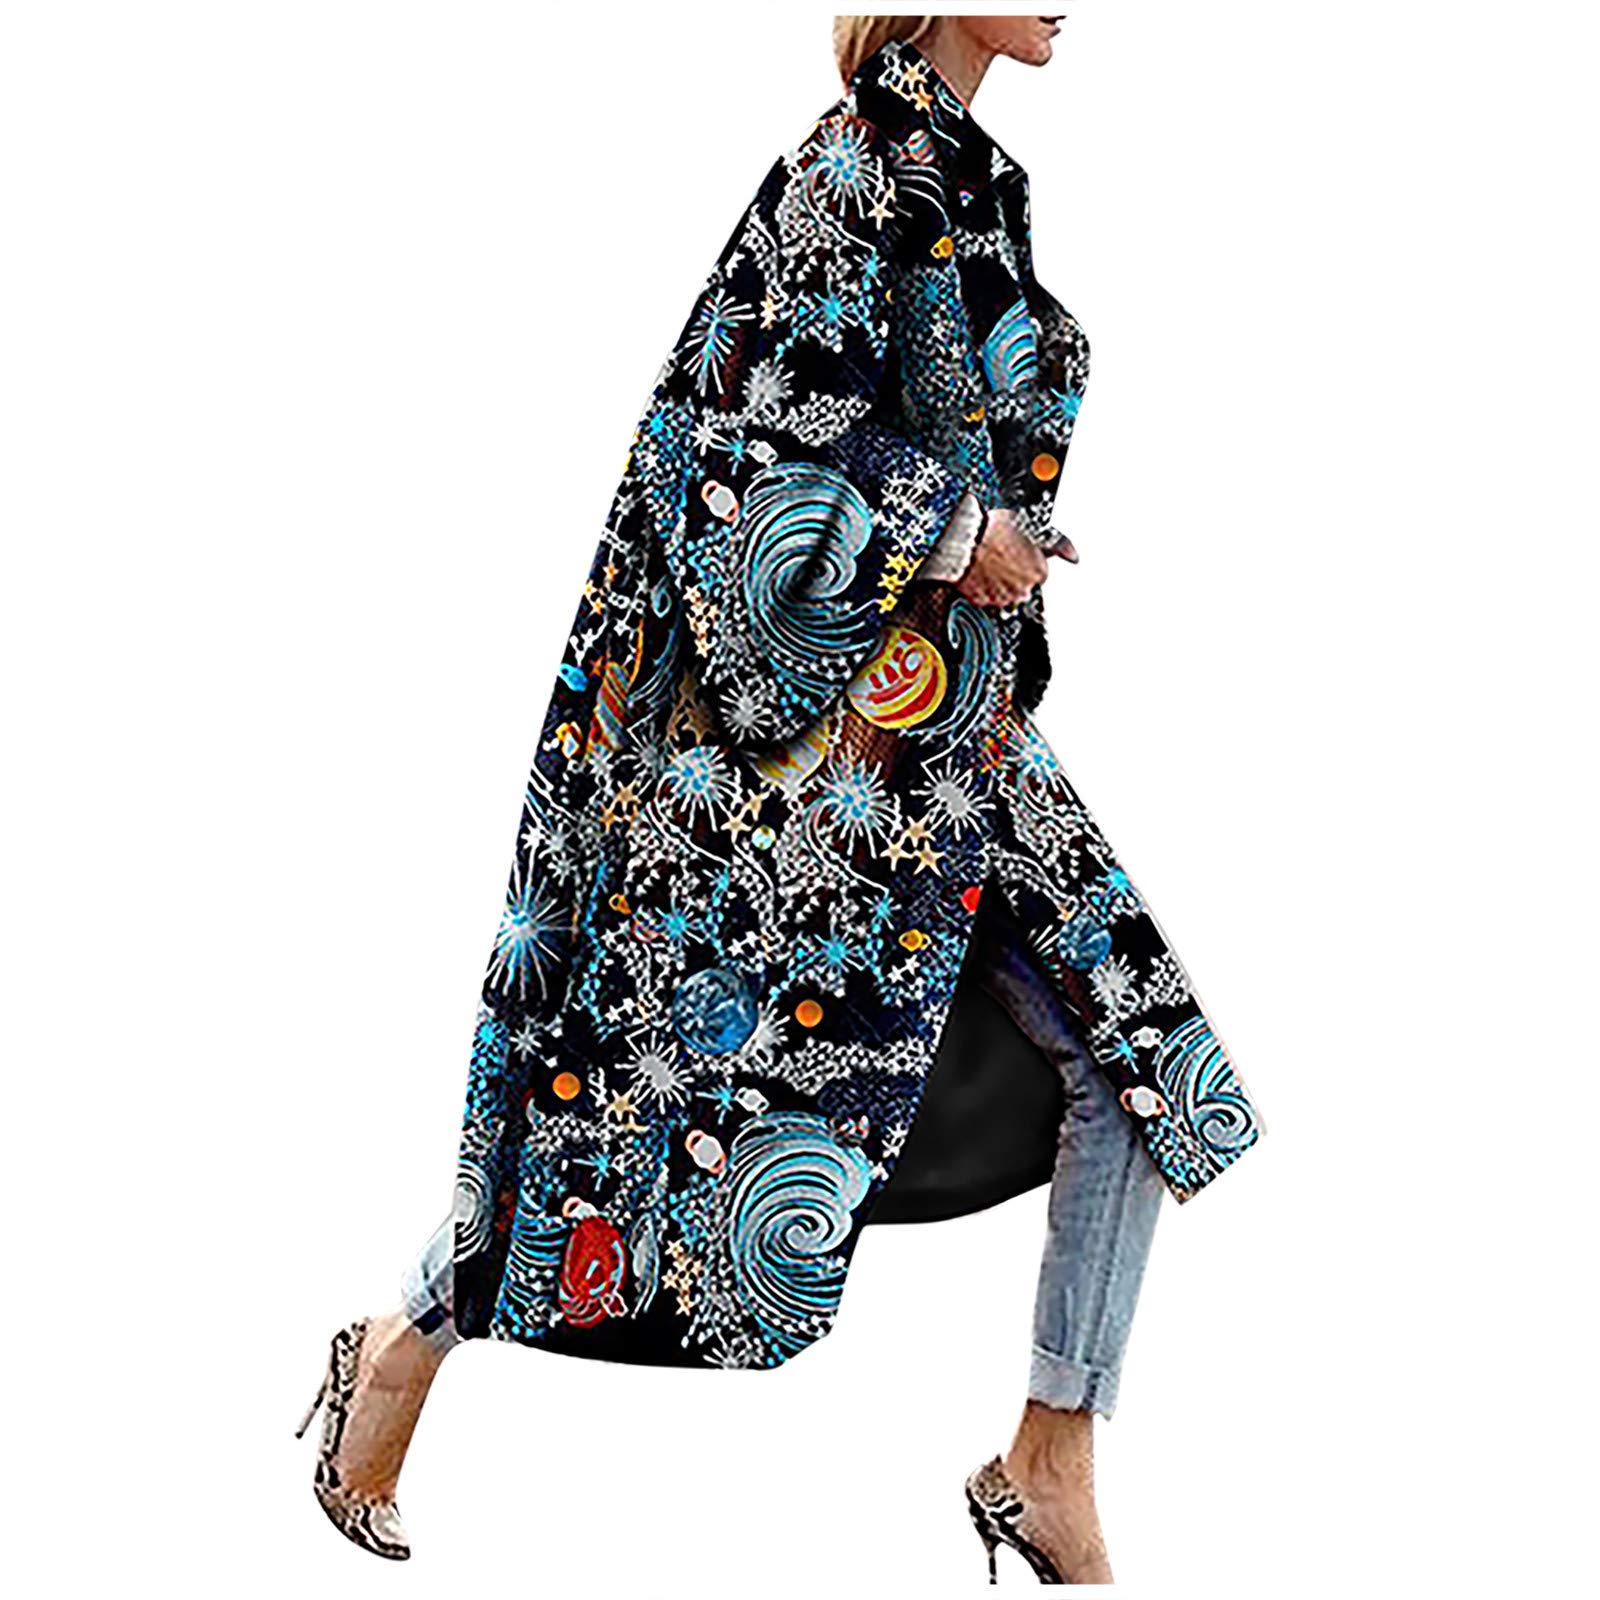 LATINDAY Women's Colorful Geometric Abstraction Print Long-Sleeve Trench Coat Open Front Soft Winter Kimono Fleece Jacket